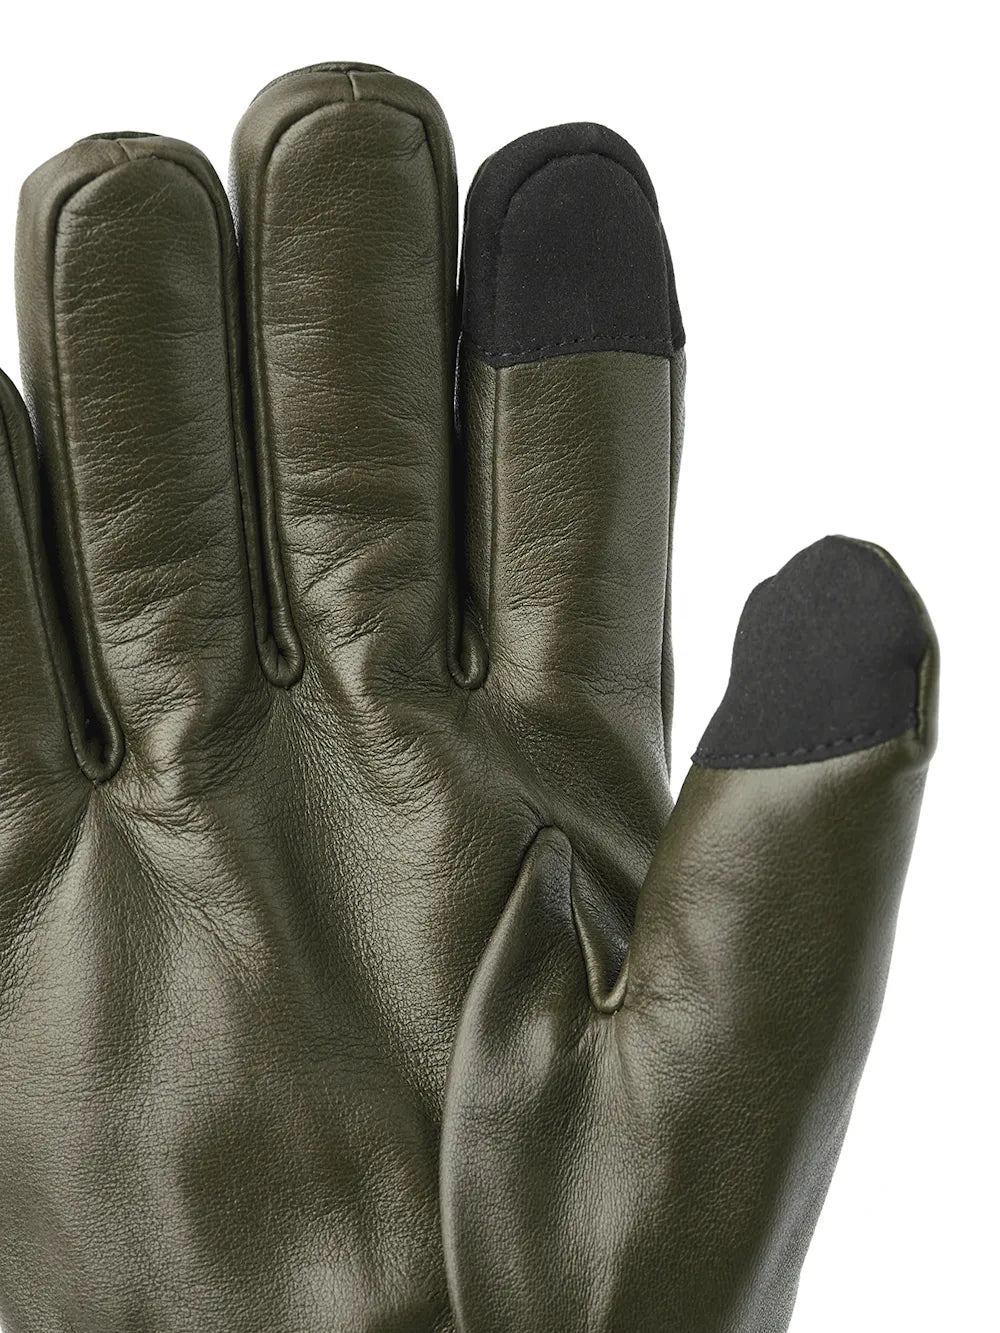 Warm, lined men’s leather glove